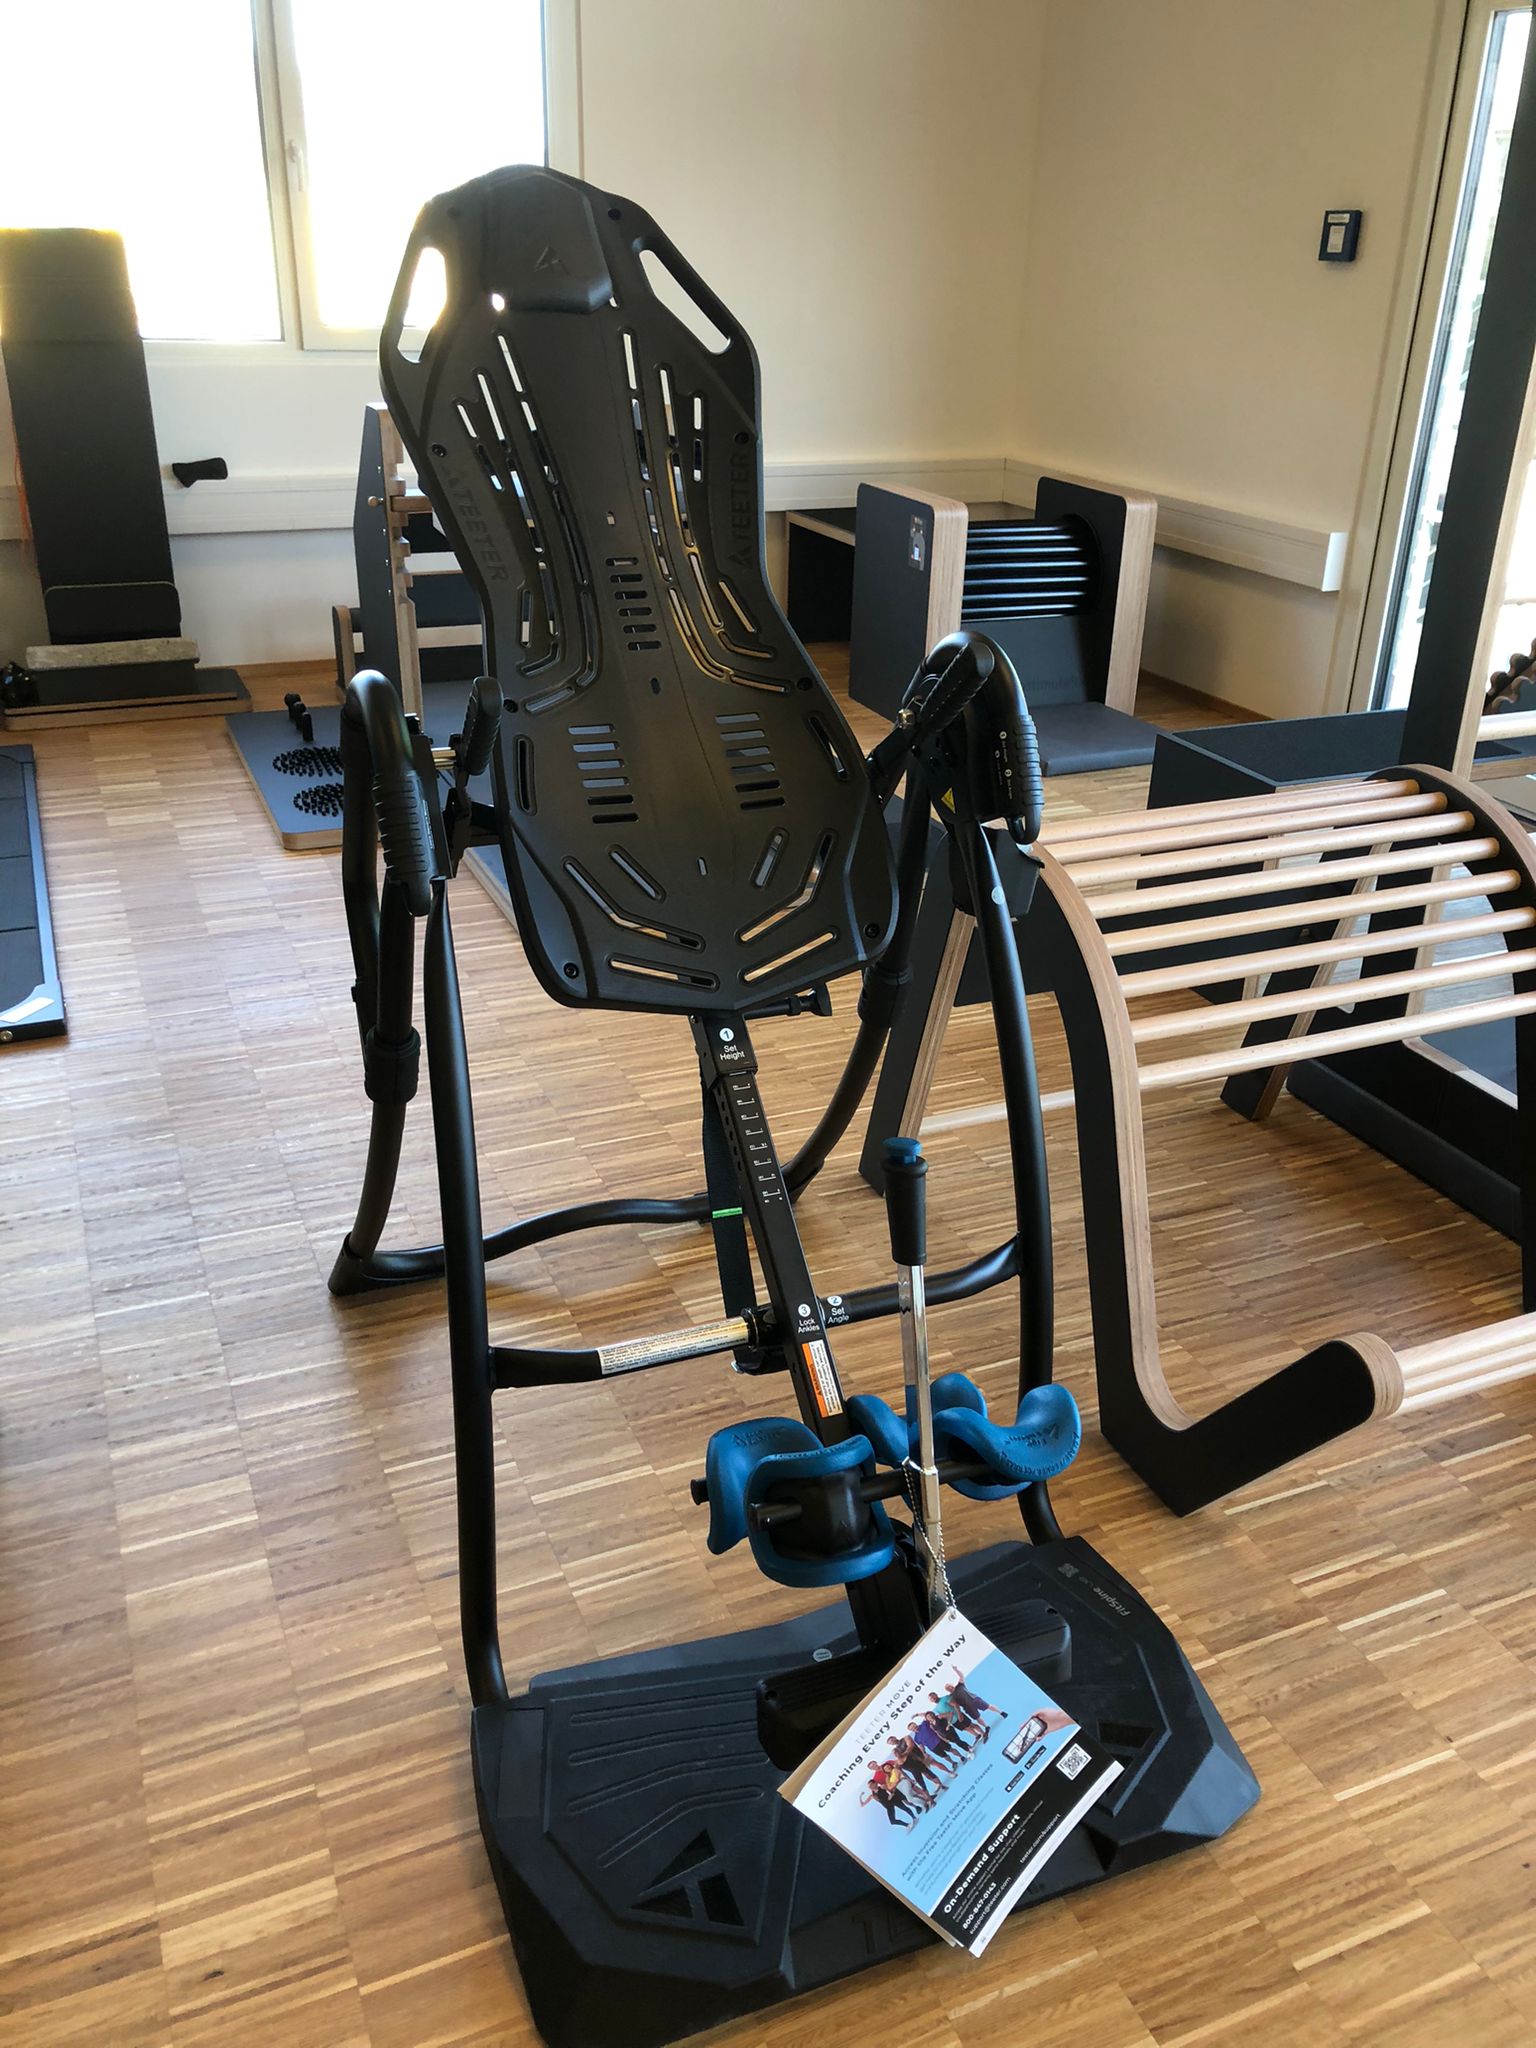 Teeter Inversion Table FitSpine LX9 (SALE!)